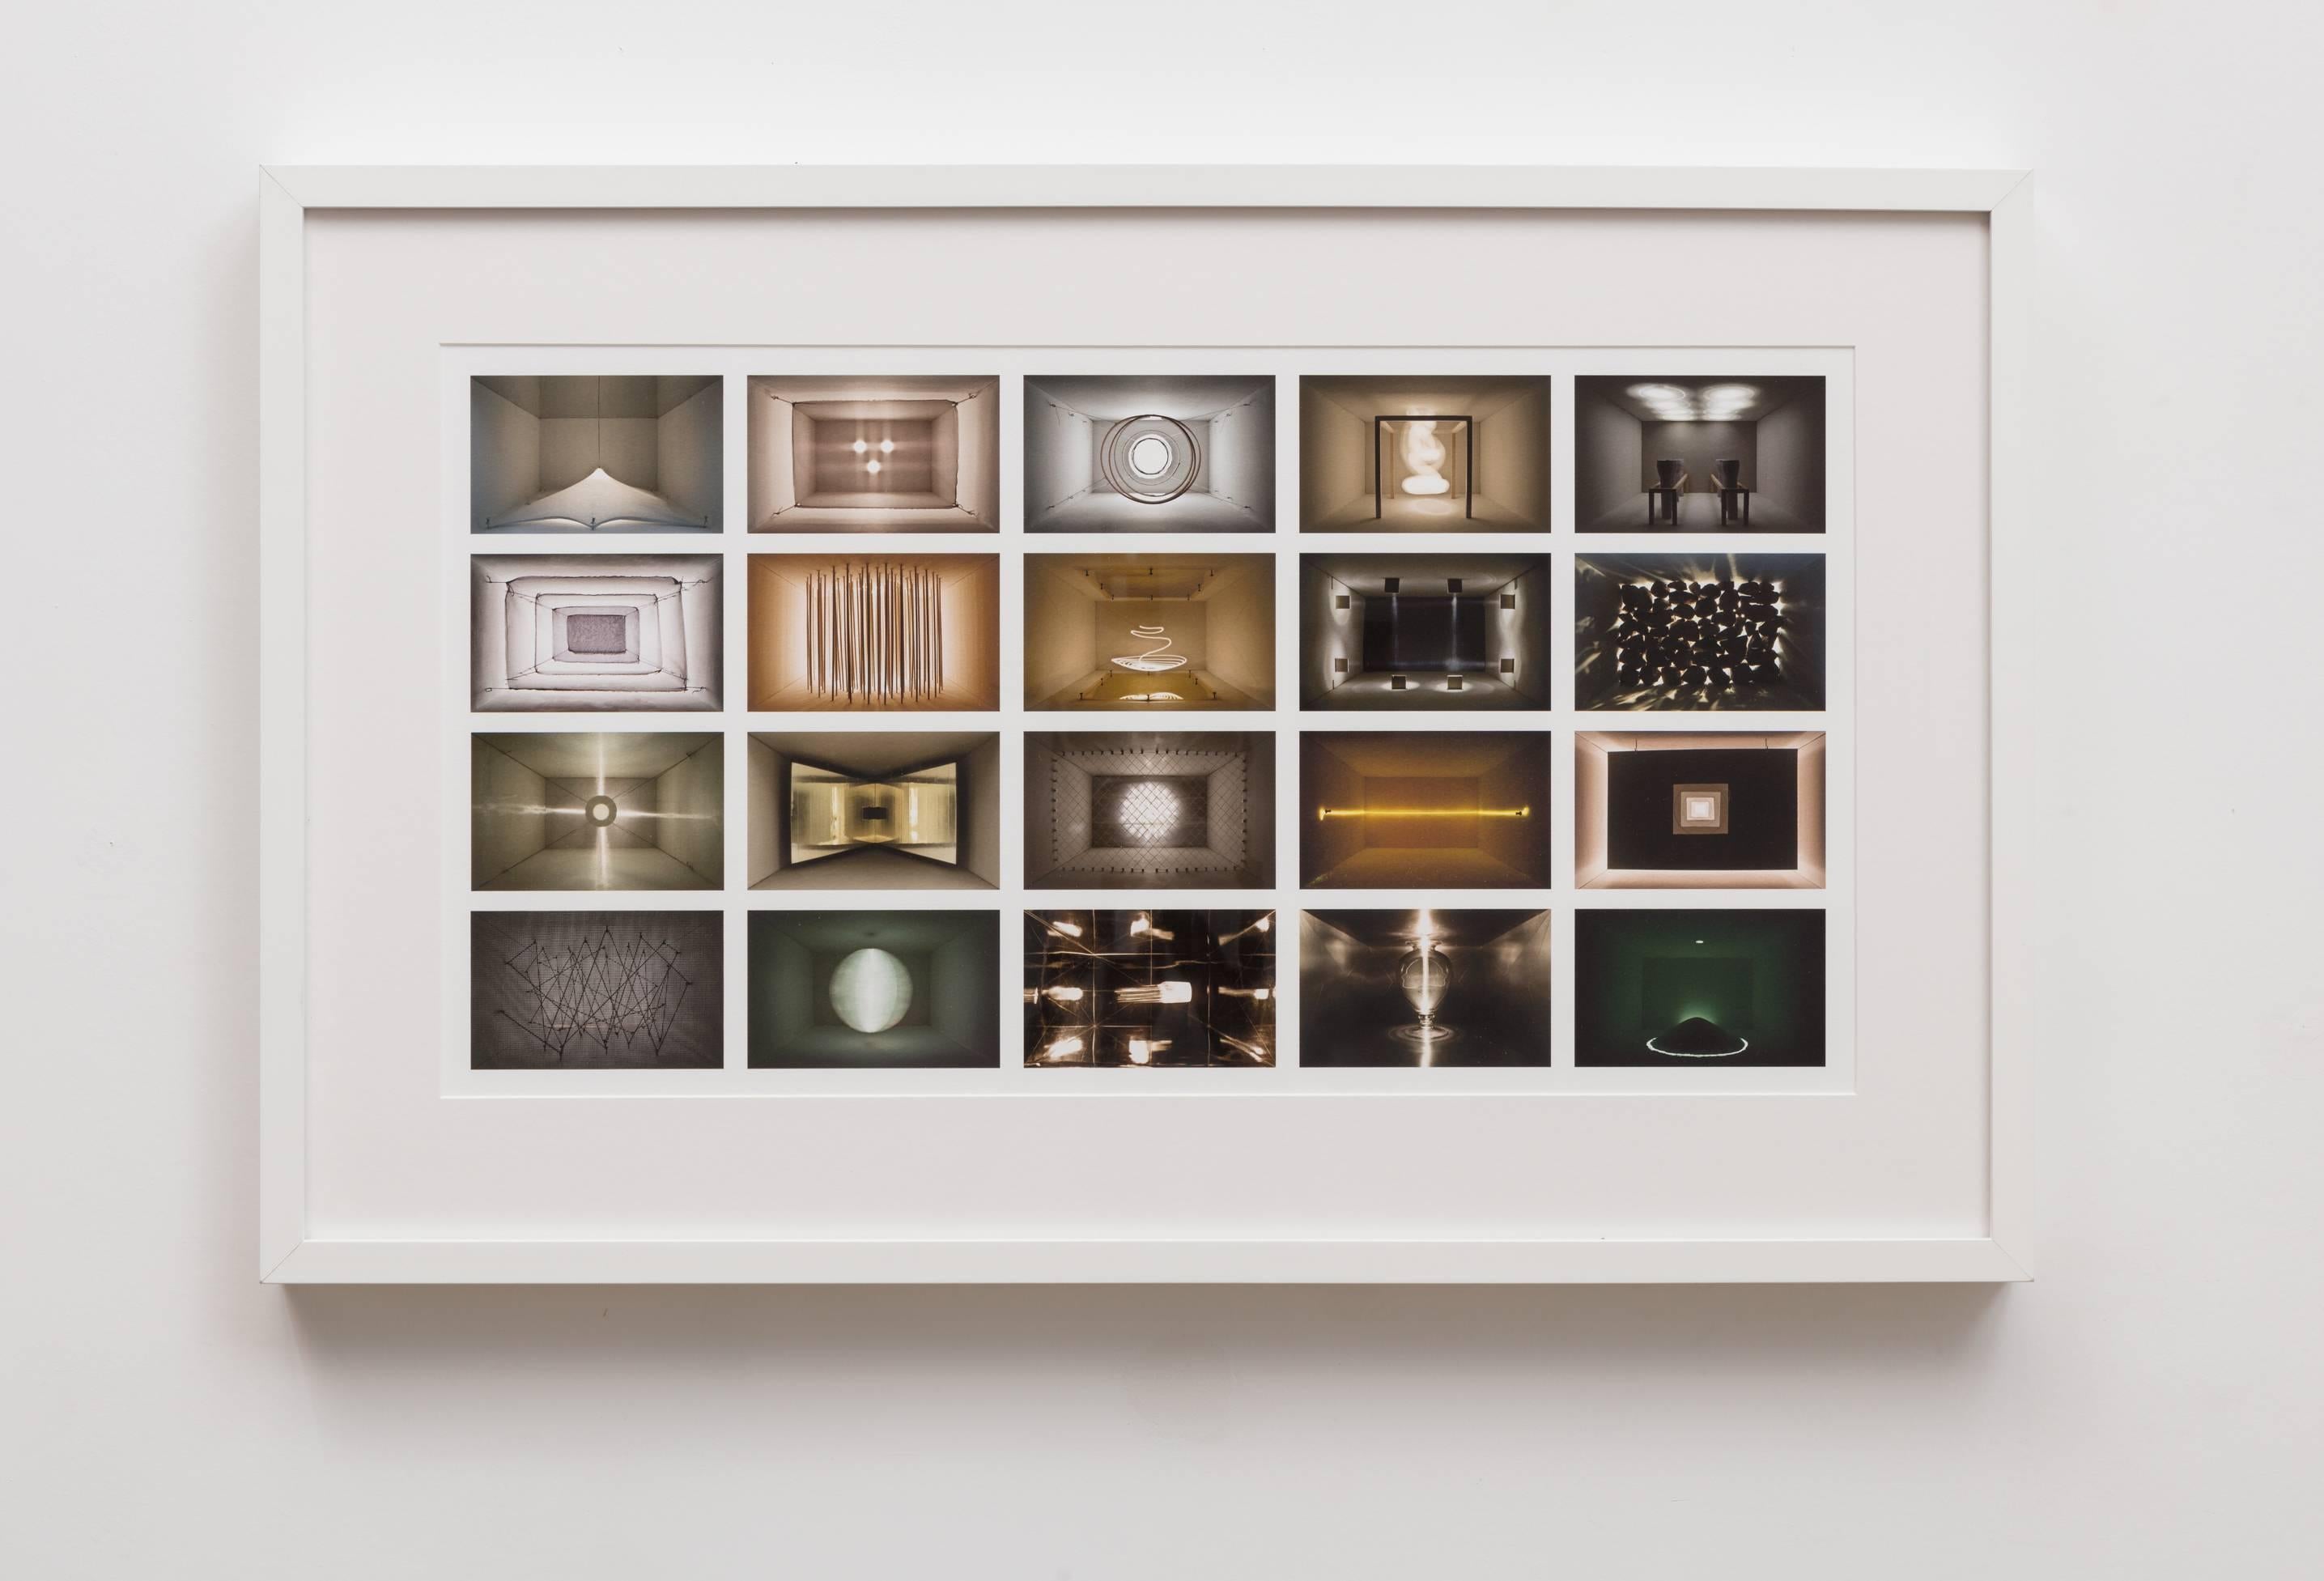 A framed composite of artist Nic Nicosia's photographs of light printed with archival ink on watercolor paper. 

Nic Nicosia was born in 1951 in Dallas, TX and currently lives and works in Dallas, TX.
He has exhibited his staged photographs